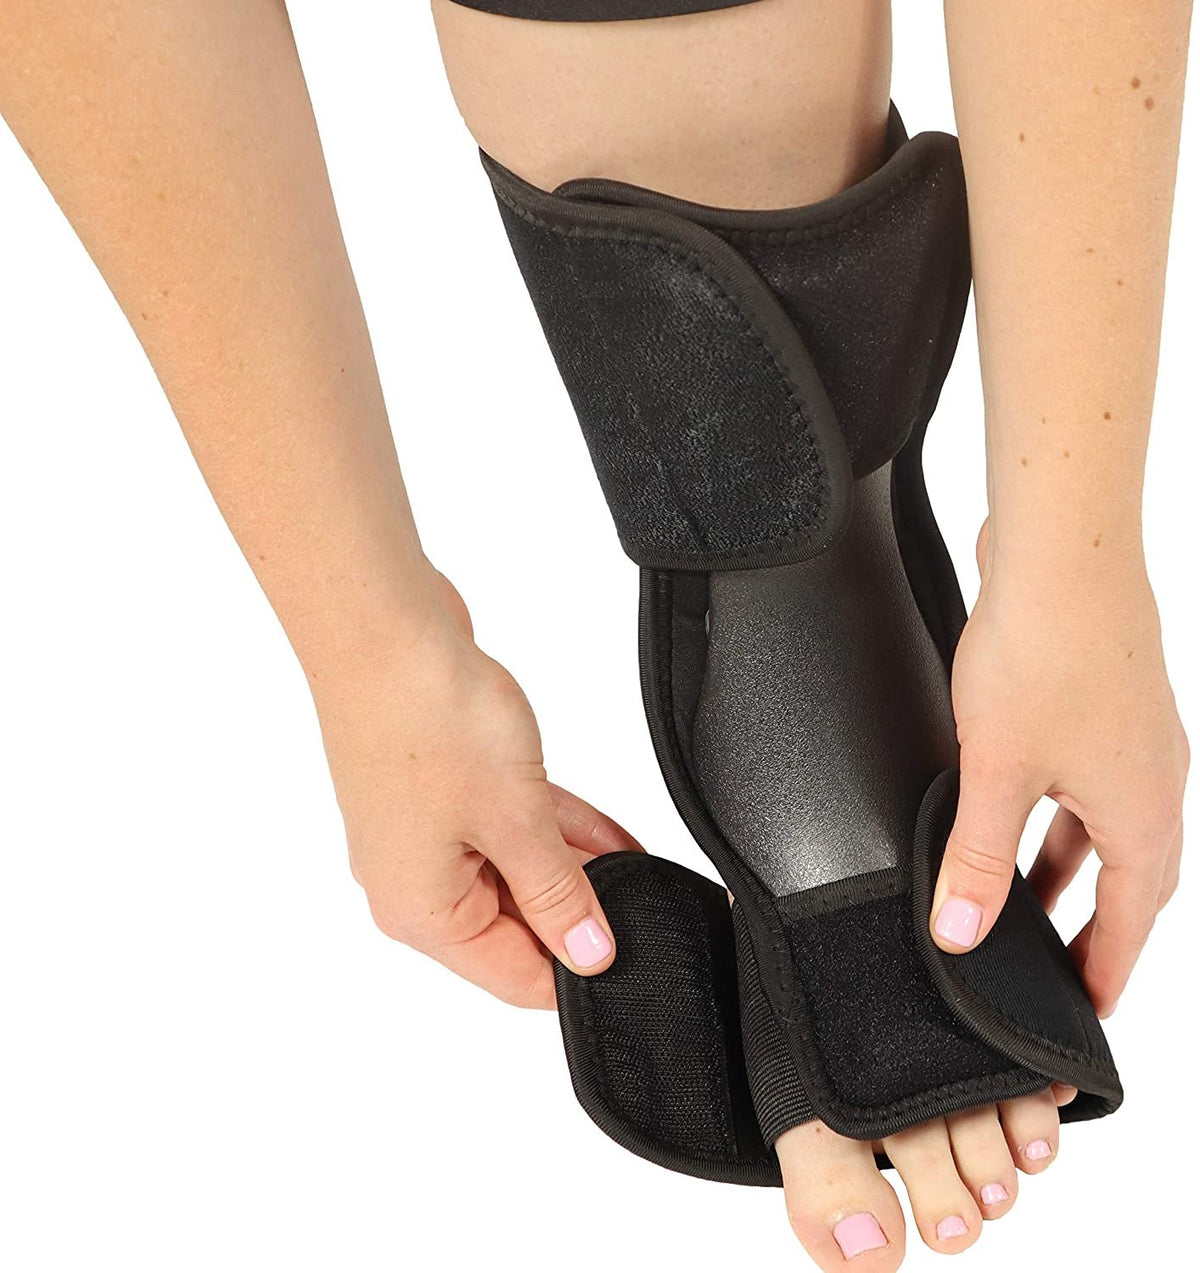 Soft Dorsal Night Splint - Breathable Design for Effective Relief from Plantar Fasciitis Pain, Heel, Arch Foot Pain, and Achilles Tendonitis